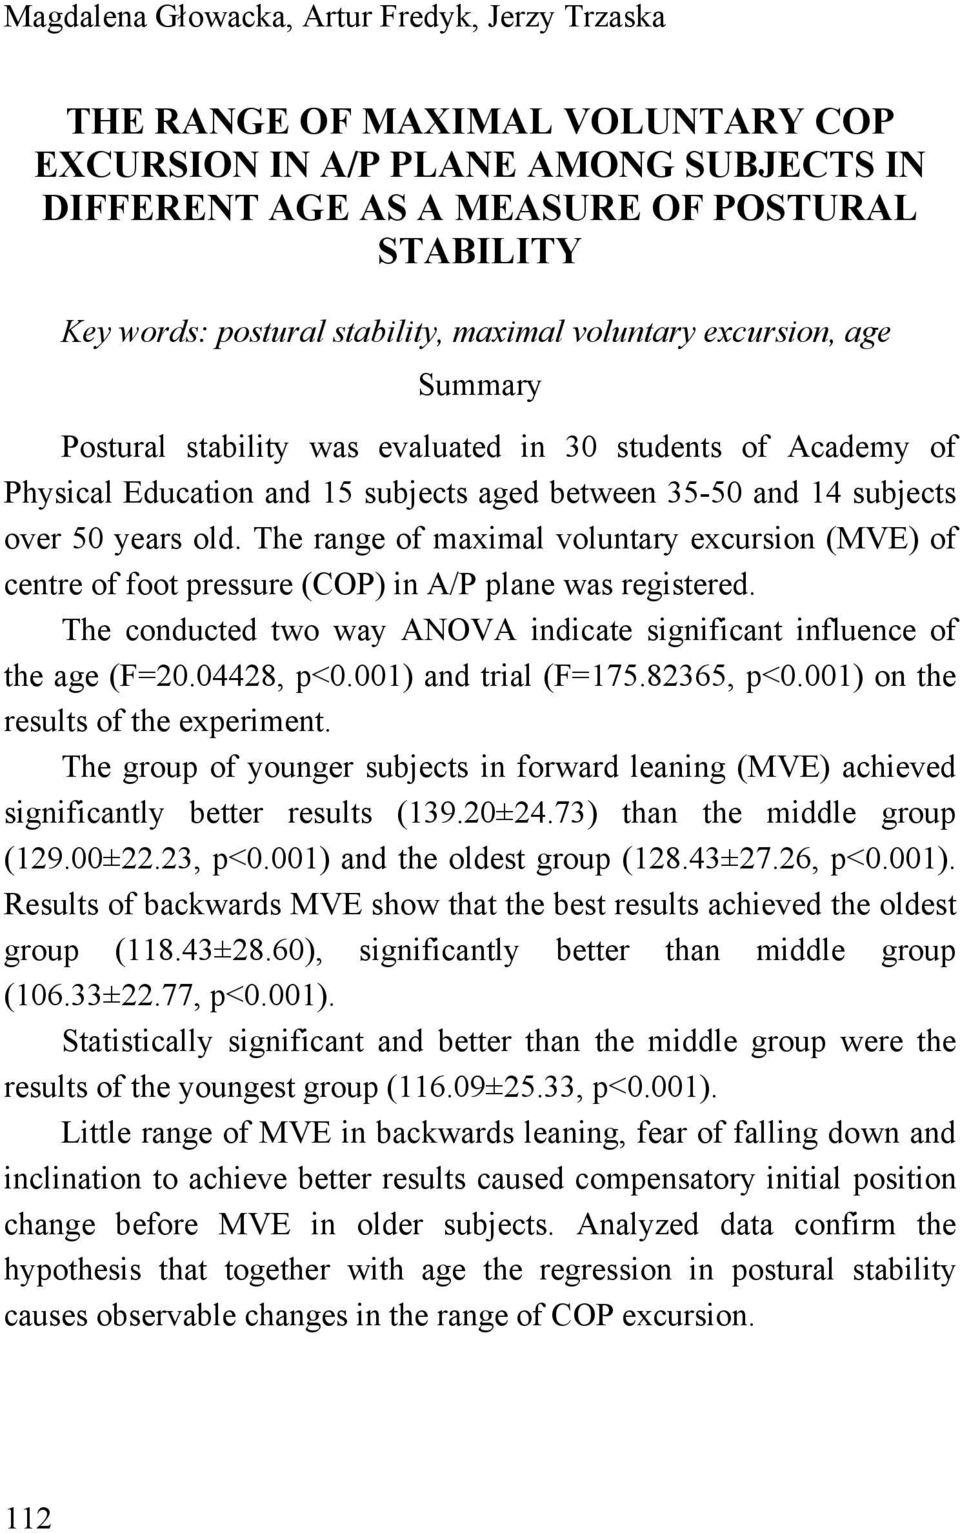 old. The range of maximal voluntary excursion (MVE) of centre of foot pressure (COP) in A/P plane was registered. The conducted two way ANOVA indicate significant influence of the age (F=20.